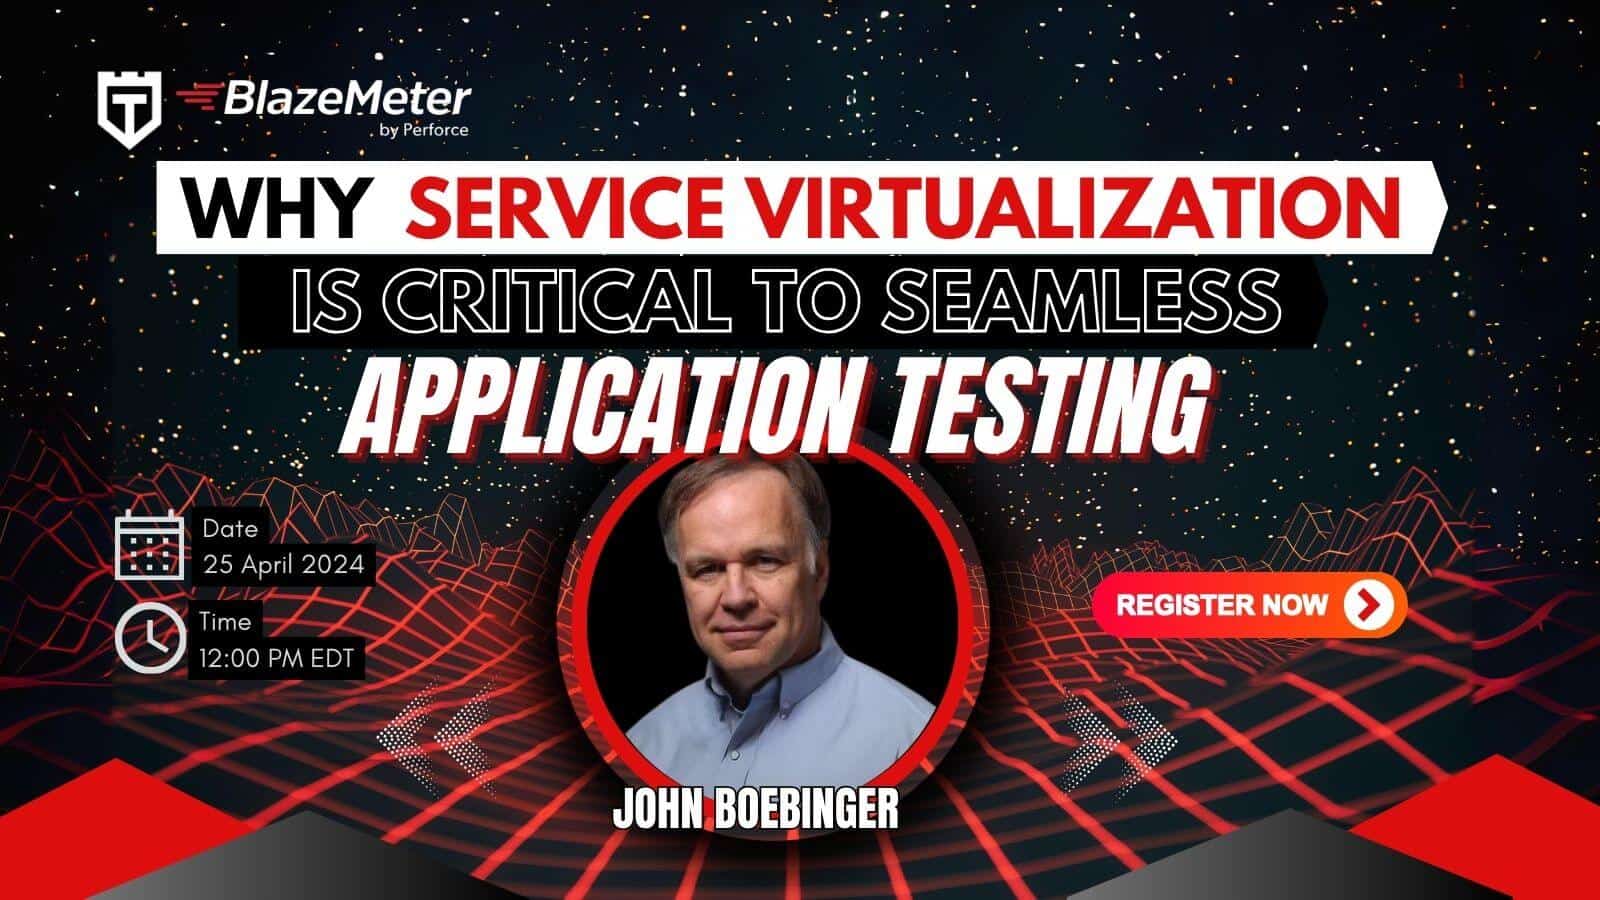 Webinar promotion for "why service virtualization is critical to seamless application testing" with speaker john boebinger, scheduled for april 25, 2024, at 12:00 pm edt, hosted by blazemeter by perforce.